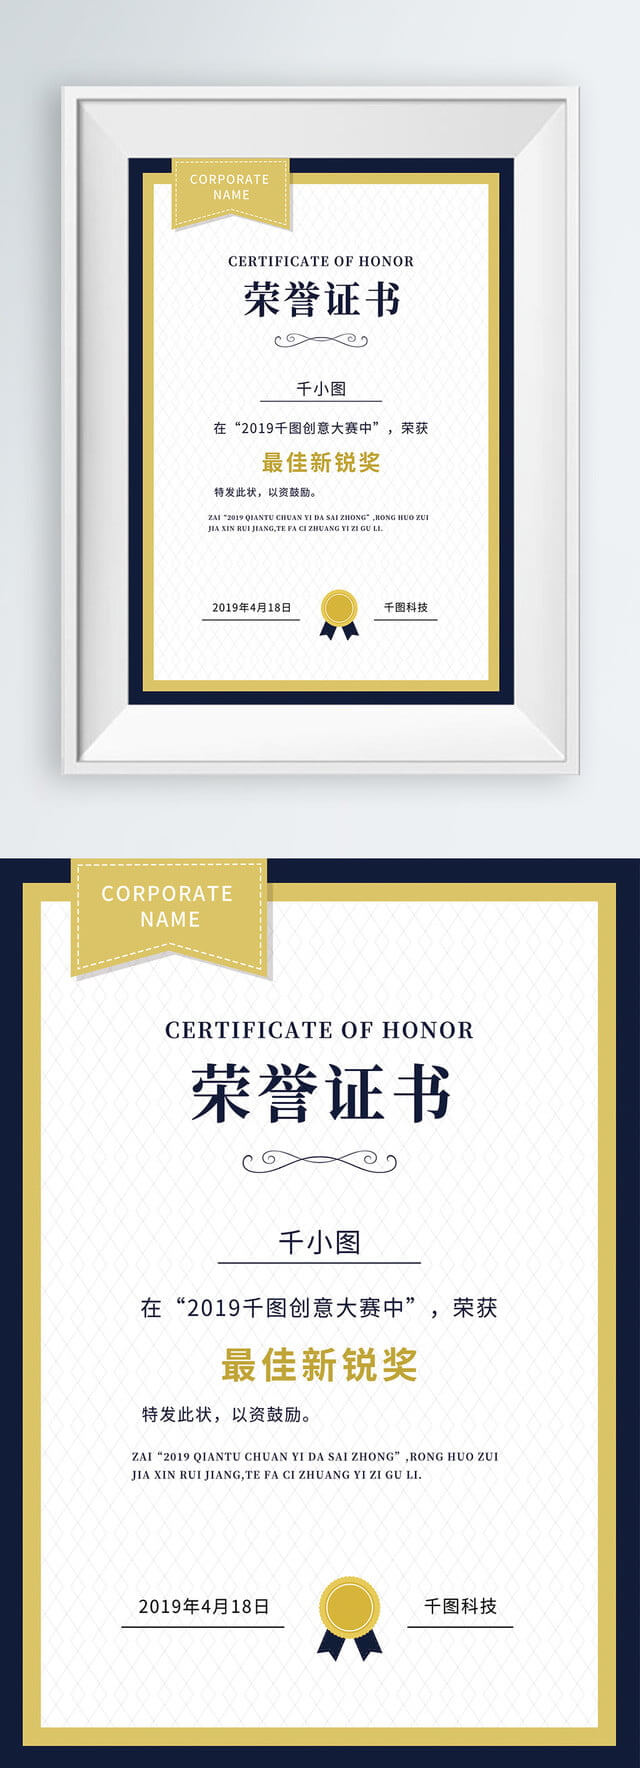 Certificate Authorization Certificate Certificate Of Honor For Certificate Of License Template